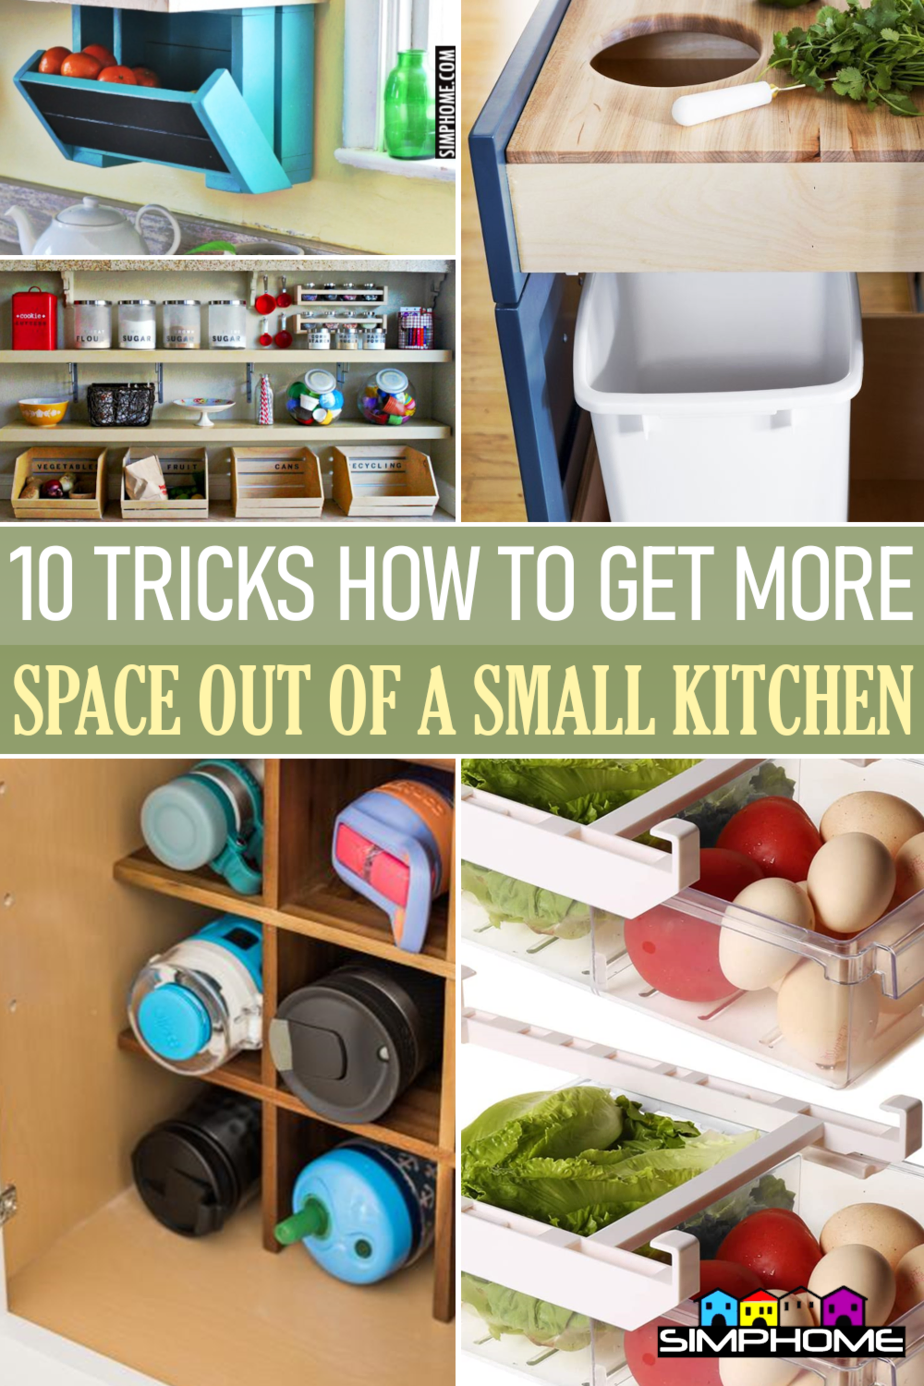 10 tricks to GET NEW storage out of a small kitchen from Simphome.comFeatured